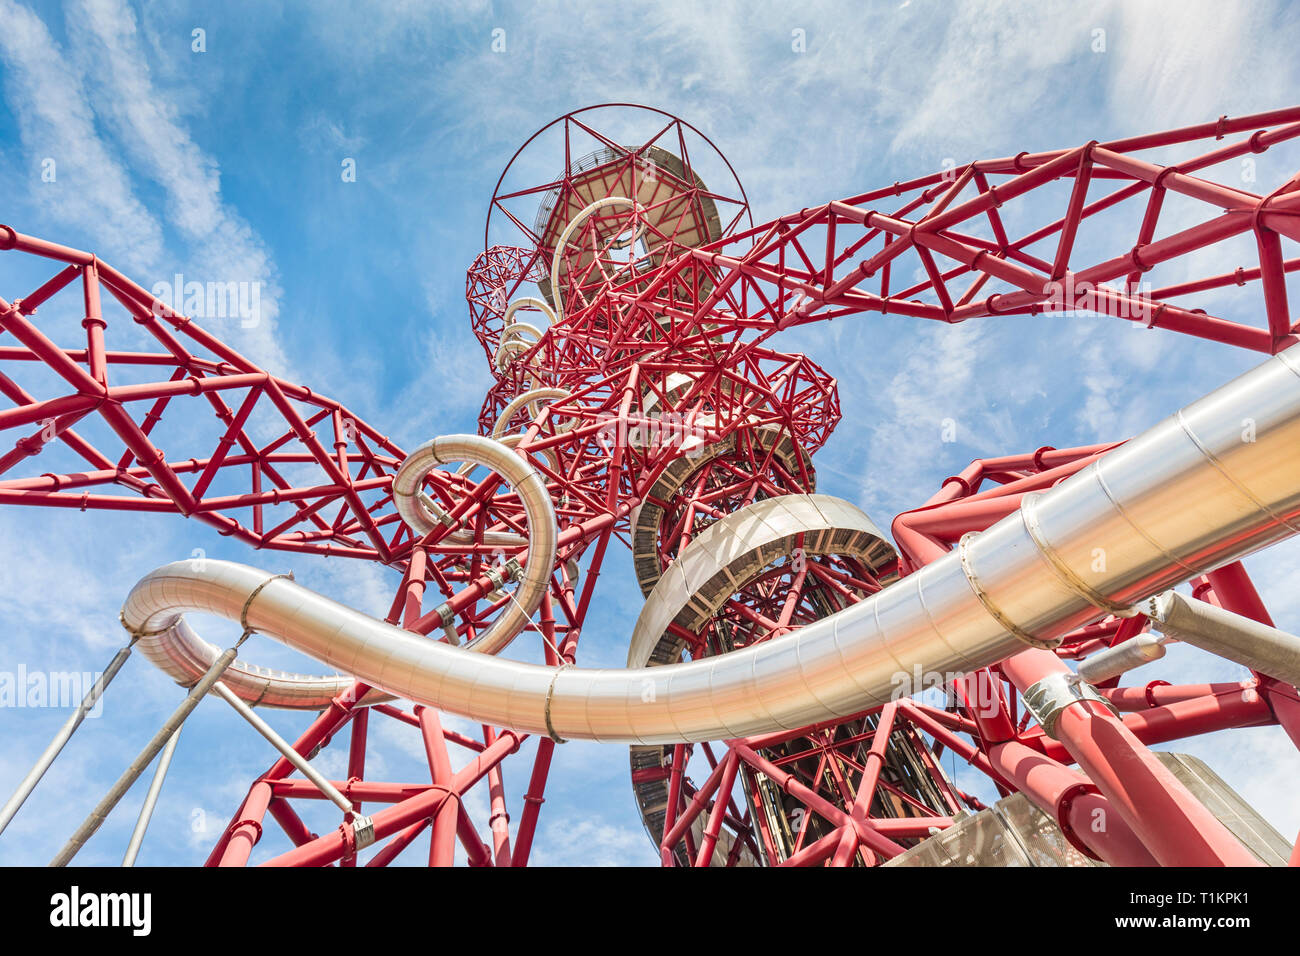 Arcelormittal orbit tower and slide in Queen Elizabeth Olympic Park. Stock Photo